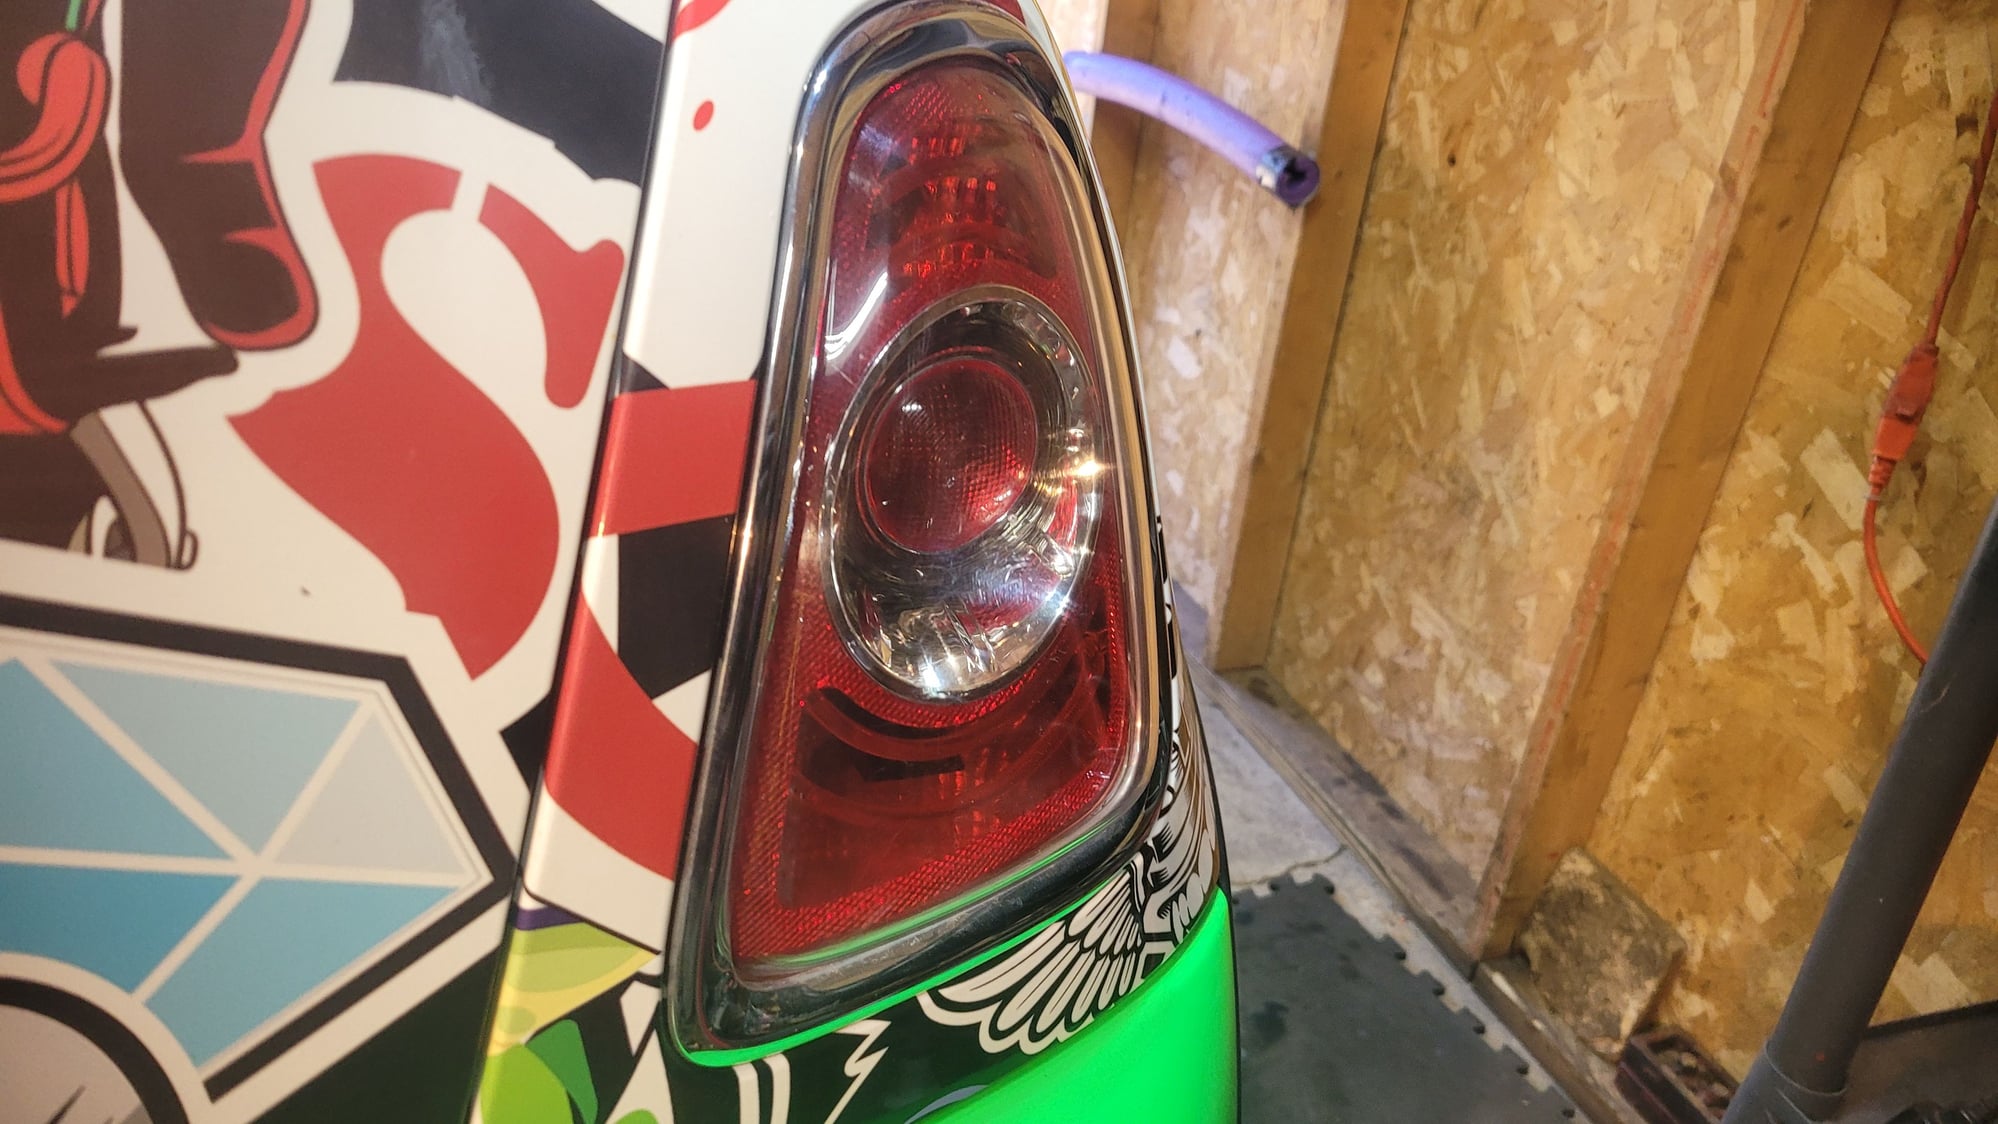 Lights - 2011 r59 jcw rear taillights and 3rd brakelight - Used - All Years  All Models - Oakcreek, WI 53154, United States